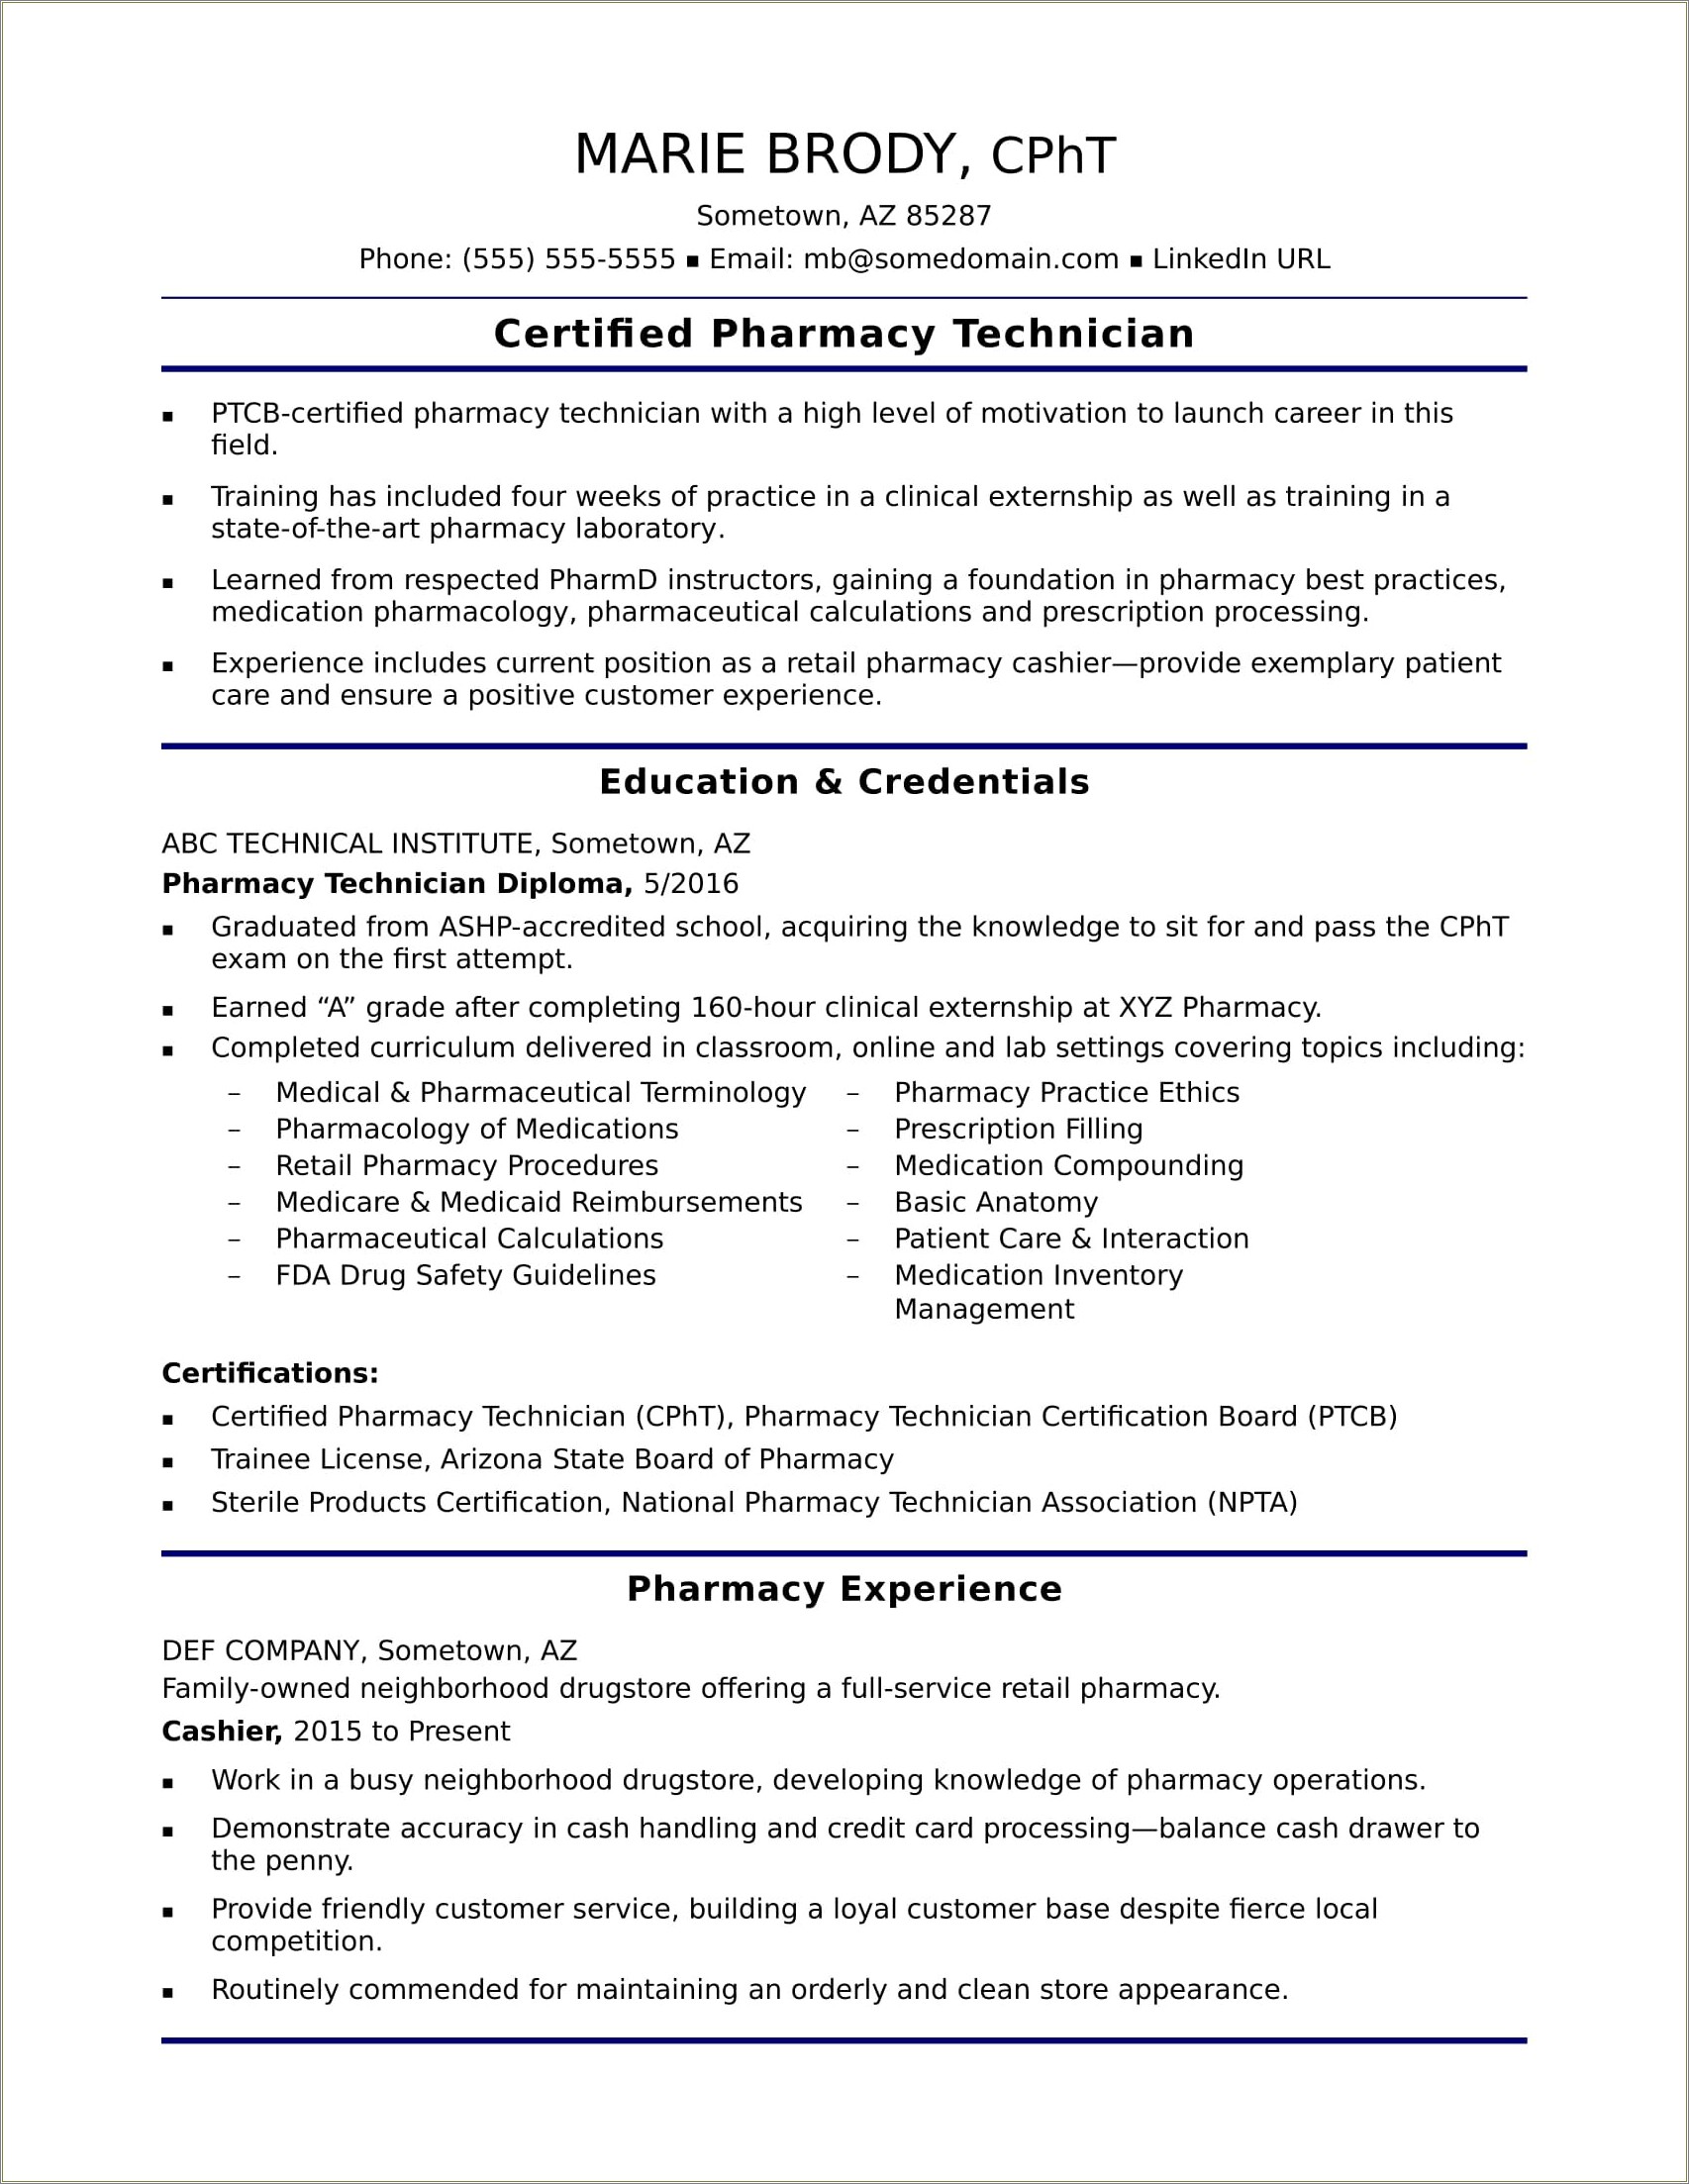 Resume Certifications For Someone With No Work Experience